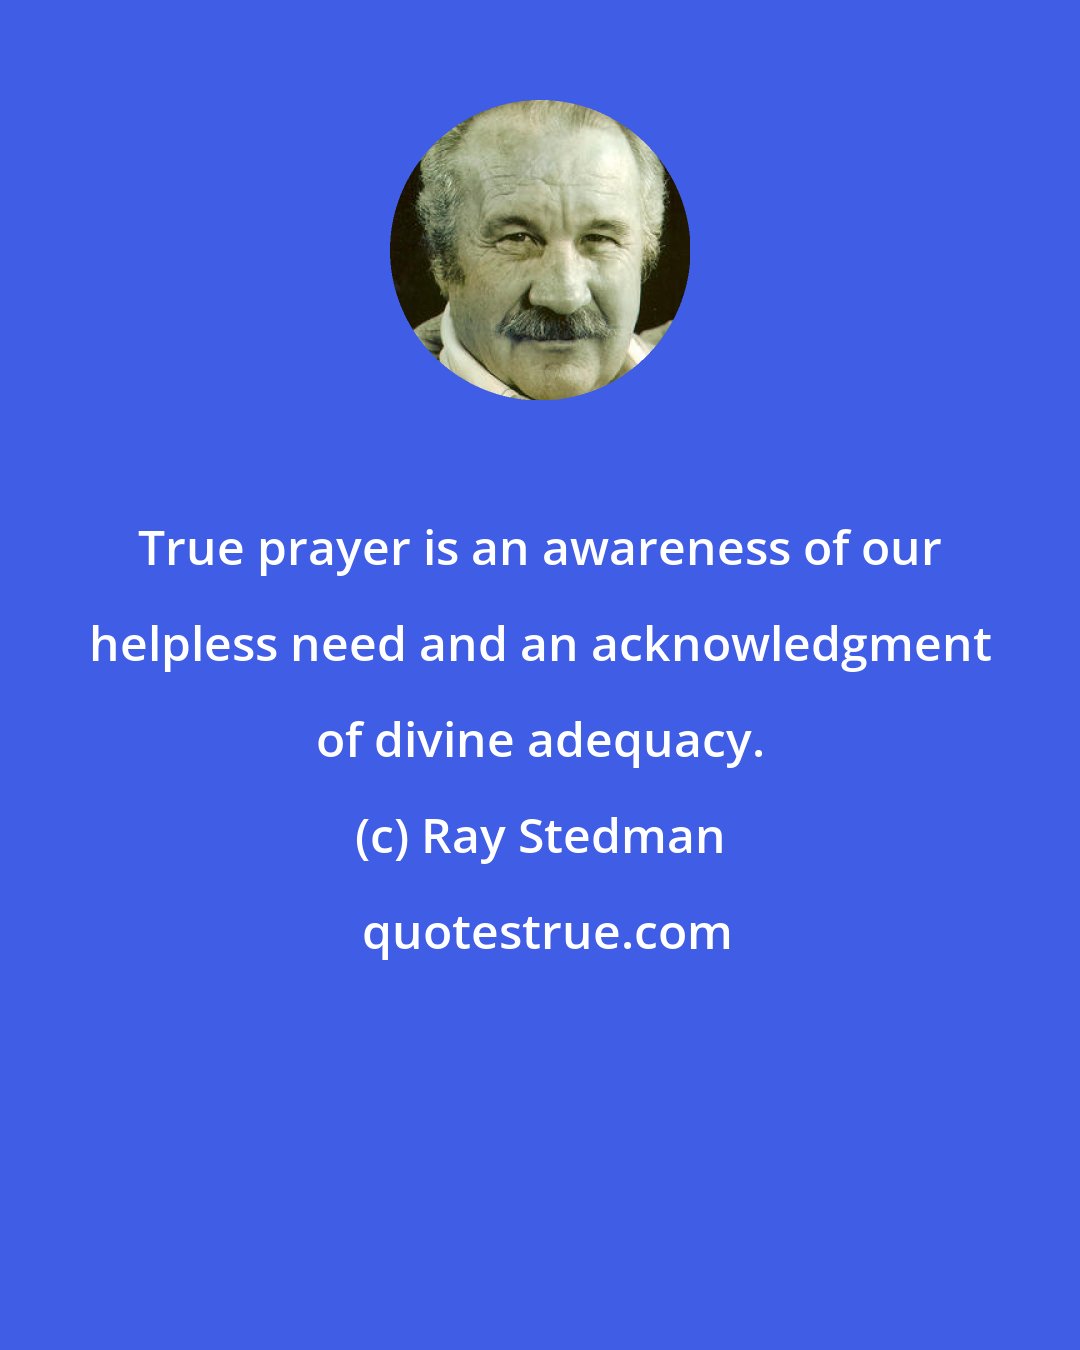 Ray Stedman: True prayer is an awareness of our helpless need and an acknowledgment of divine adequacy.